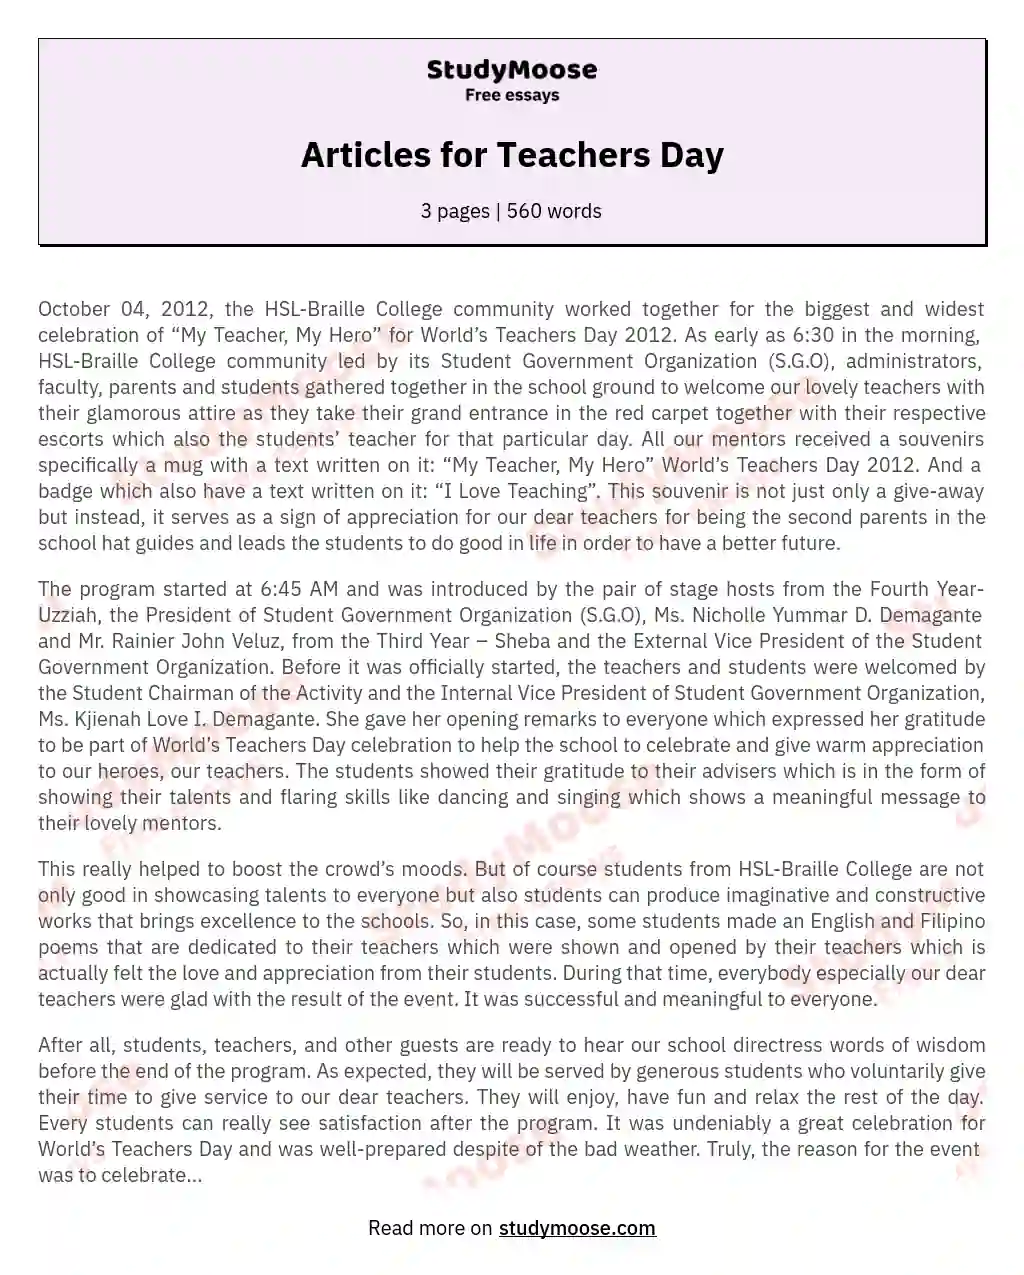 Articles for Teachers Day essay